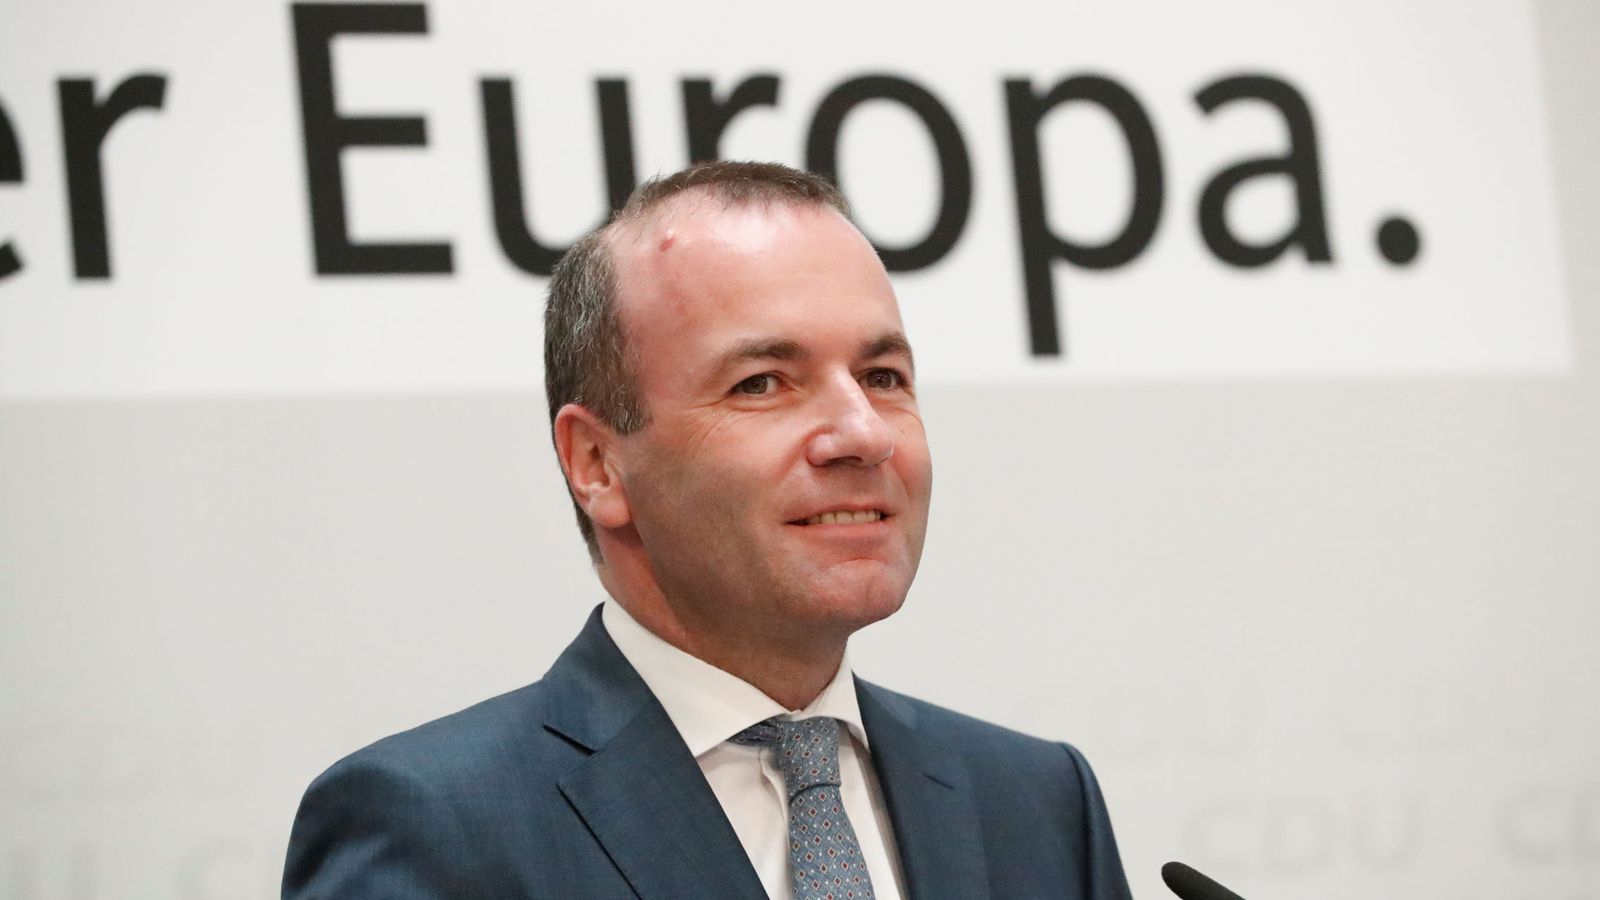 Foto: Manfred Weber, candidato del Partido Popular Europeo. (Reuters)